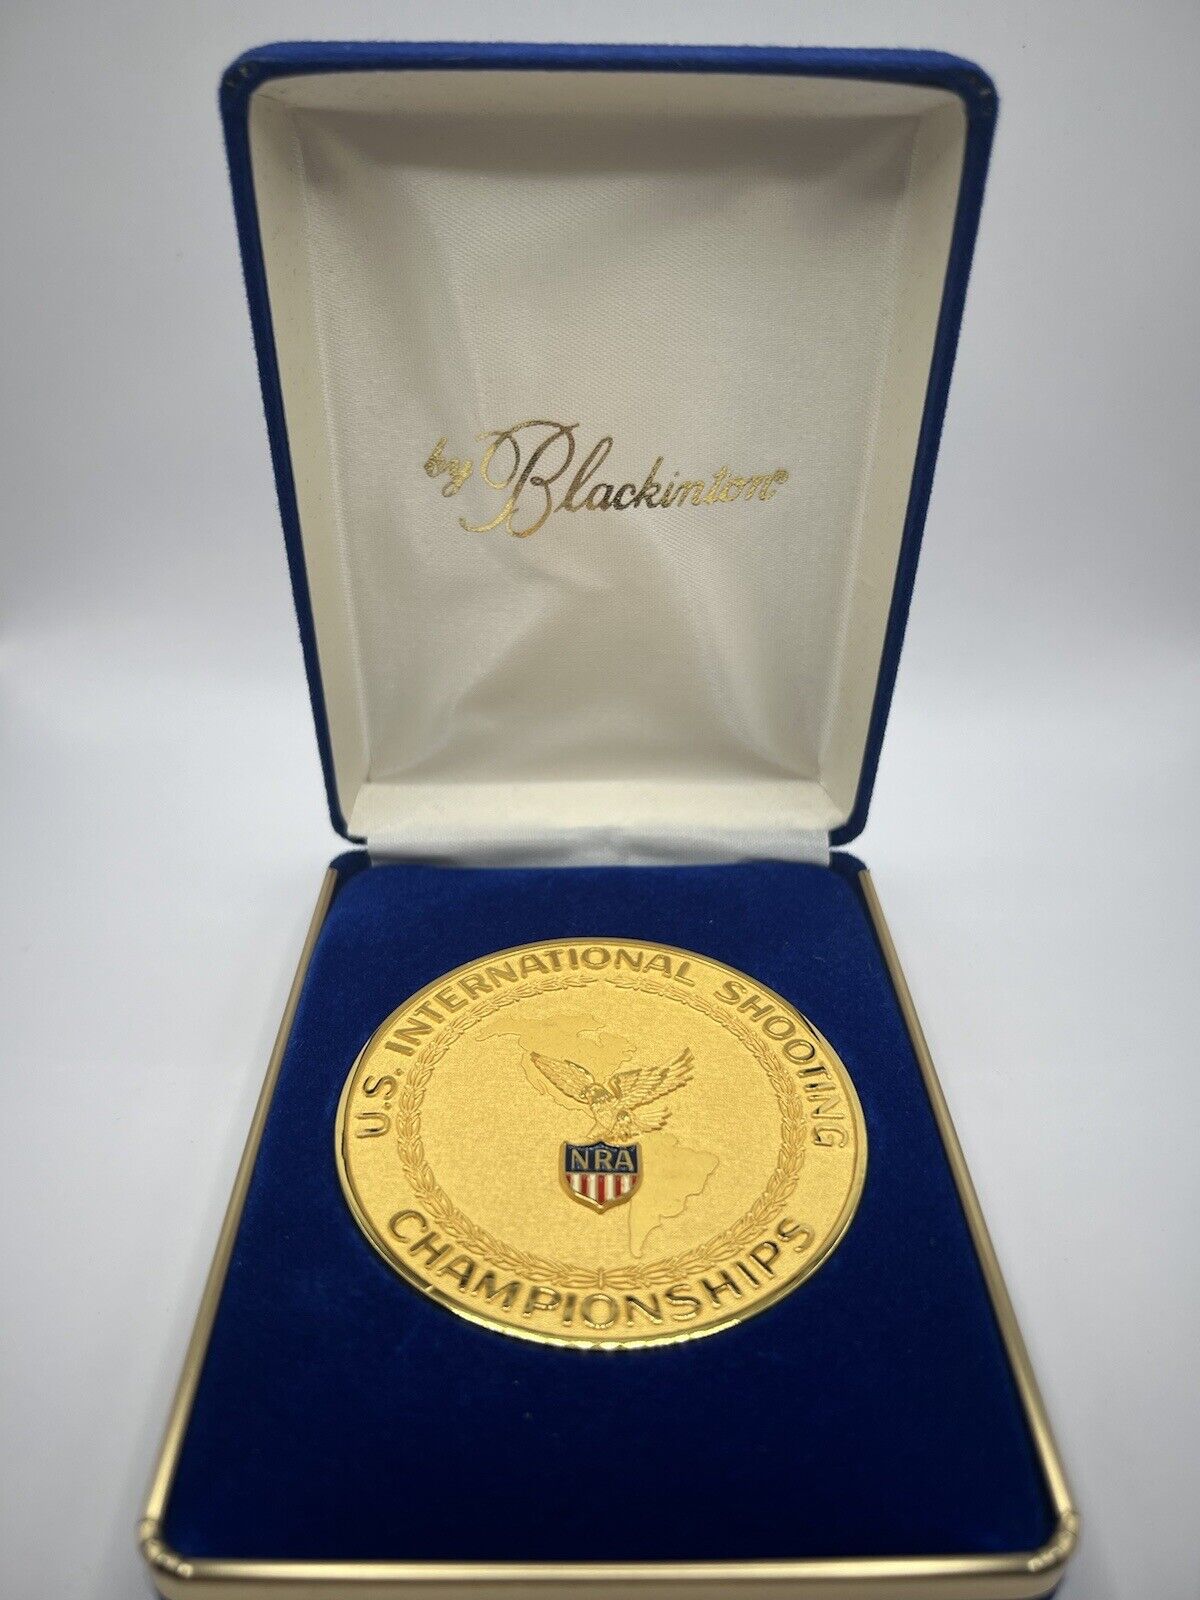 NRA US International Shooting Championships Gold Medallion Cased by Blackinton